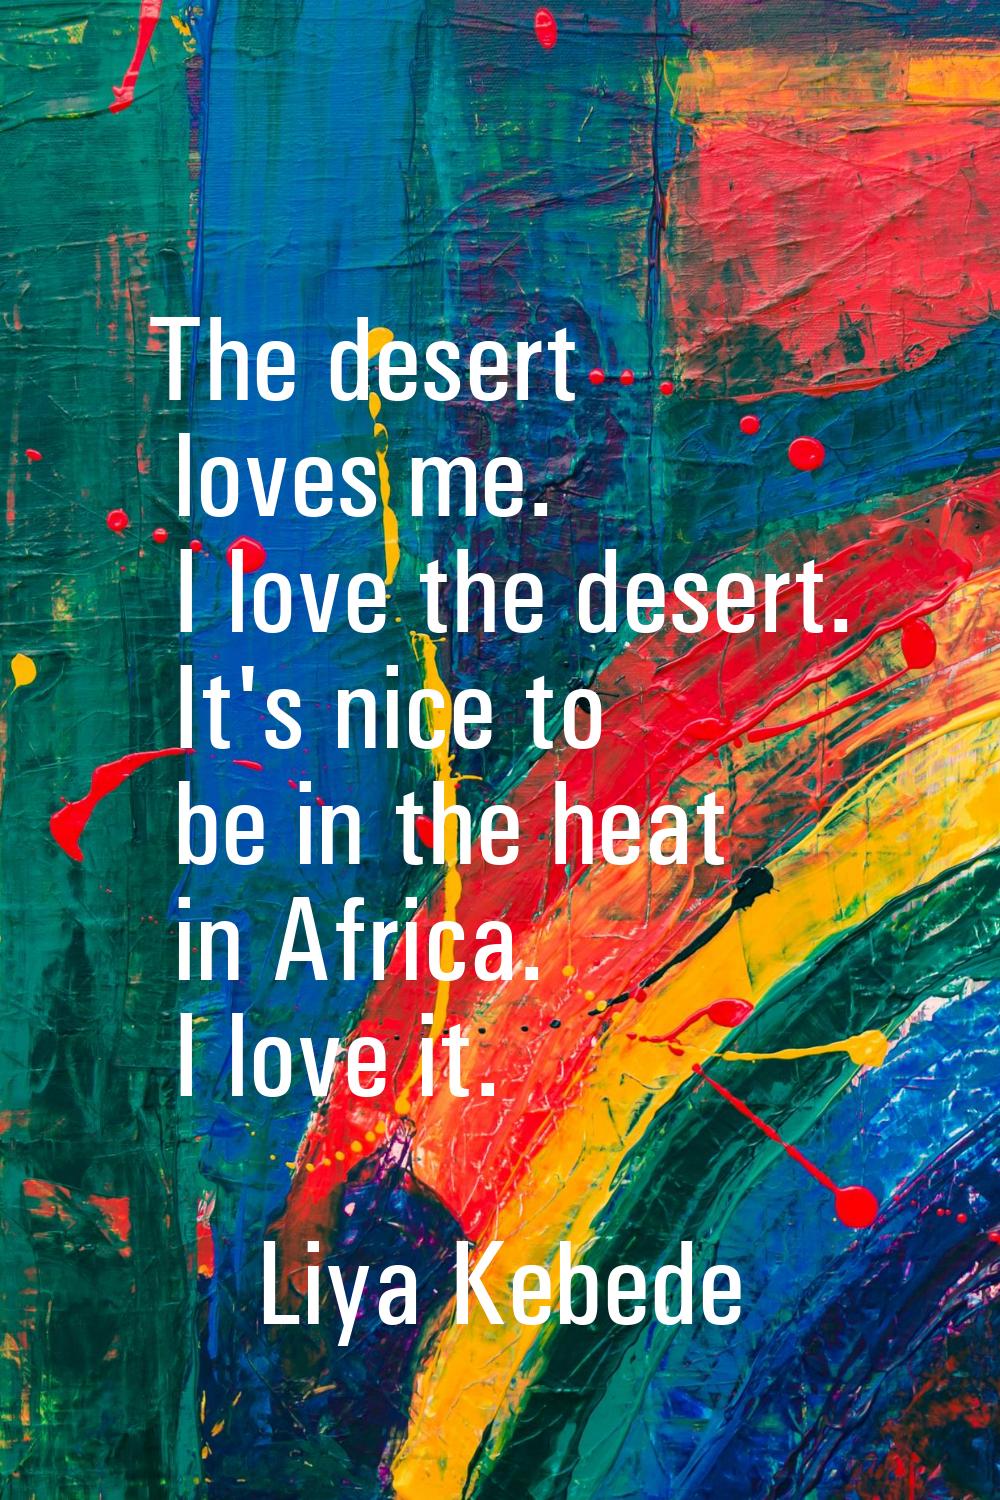 The desert loves me. I love the desert. It's nice to be in the heat in Africa. I love it.